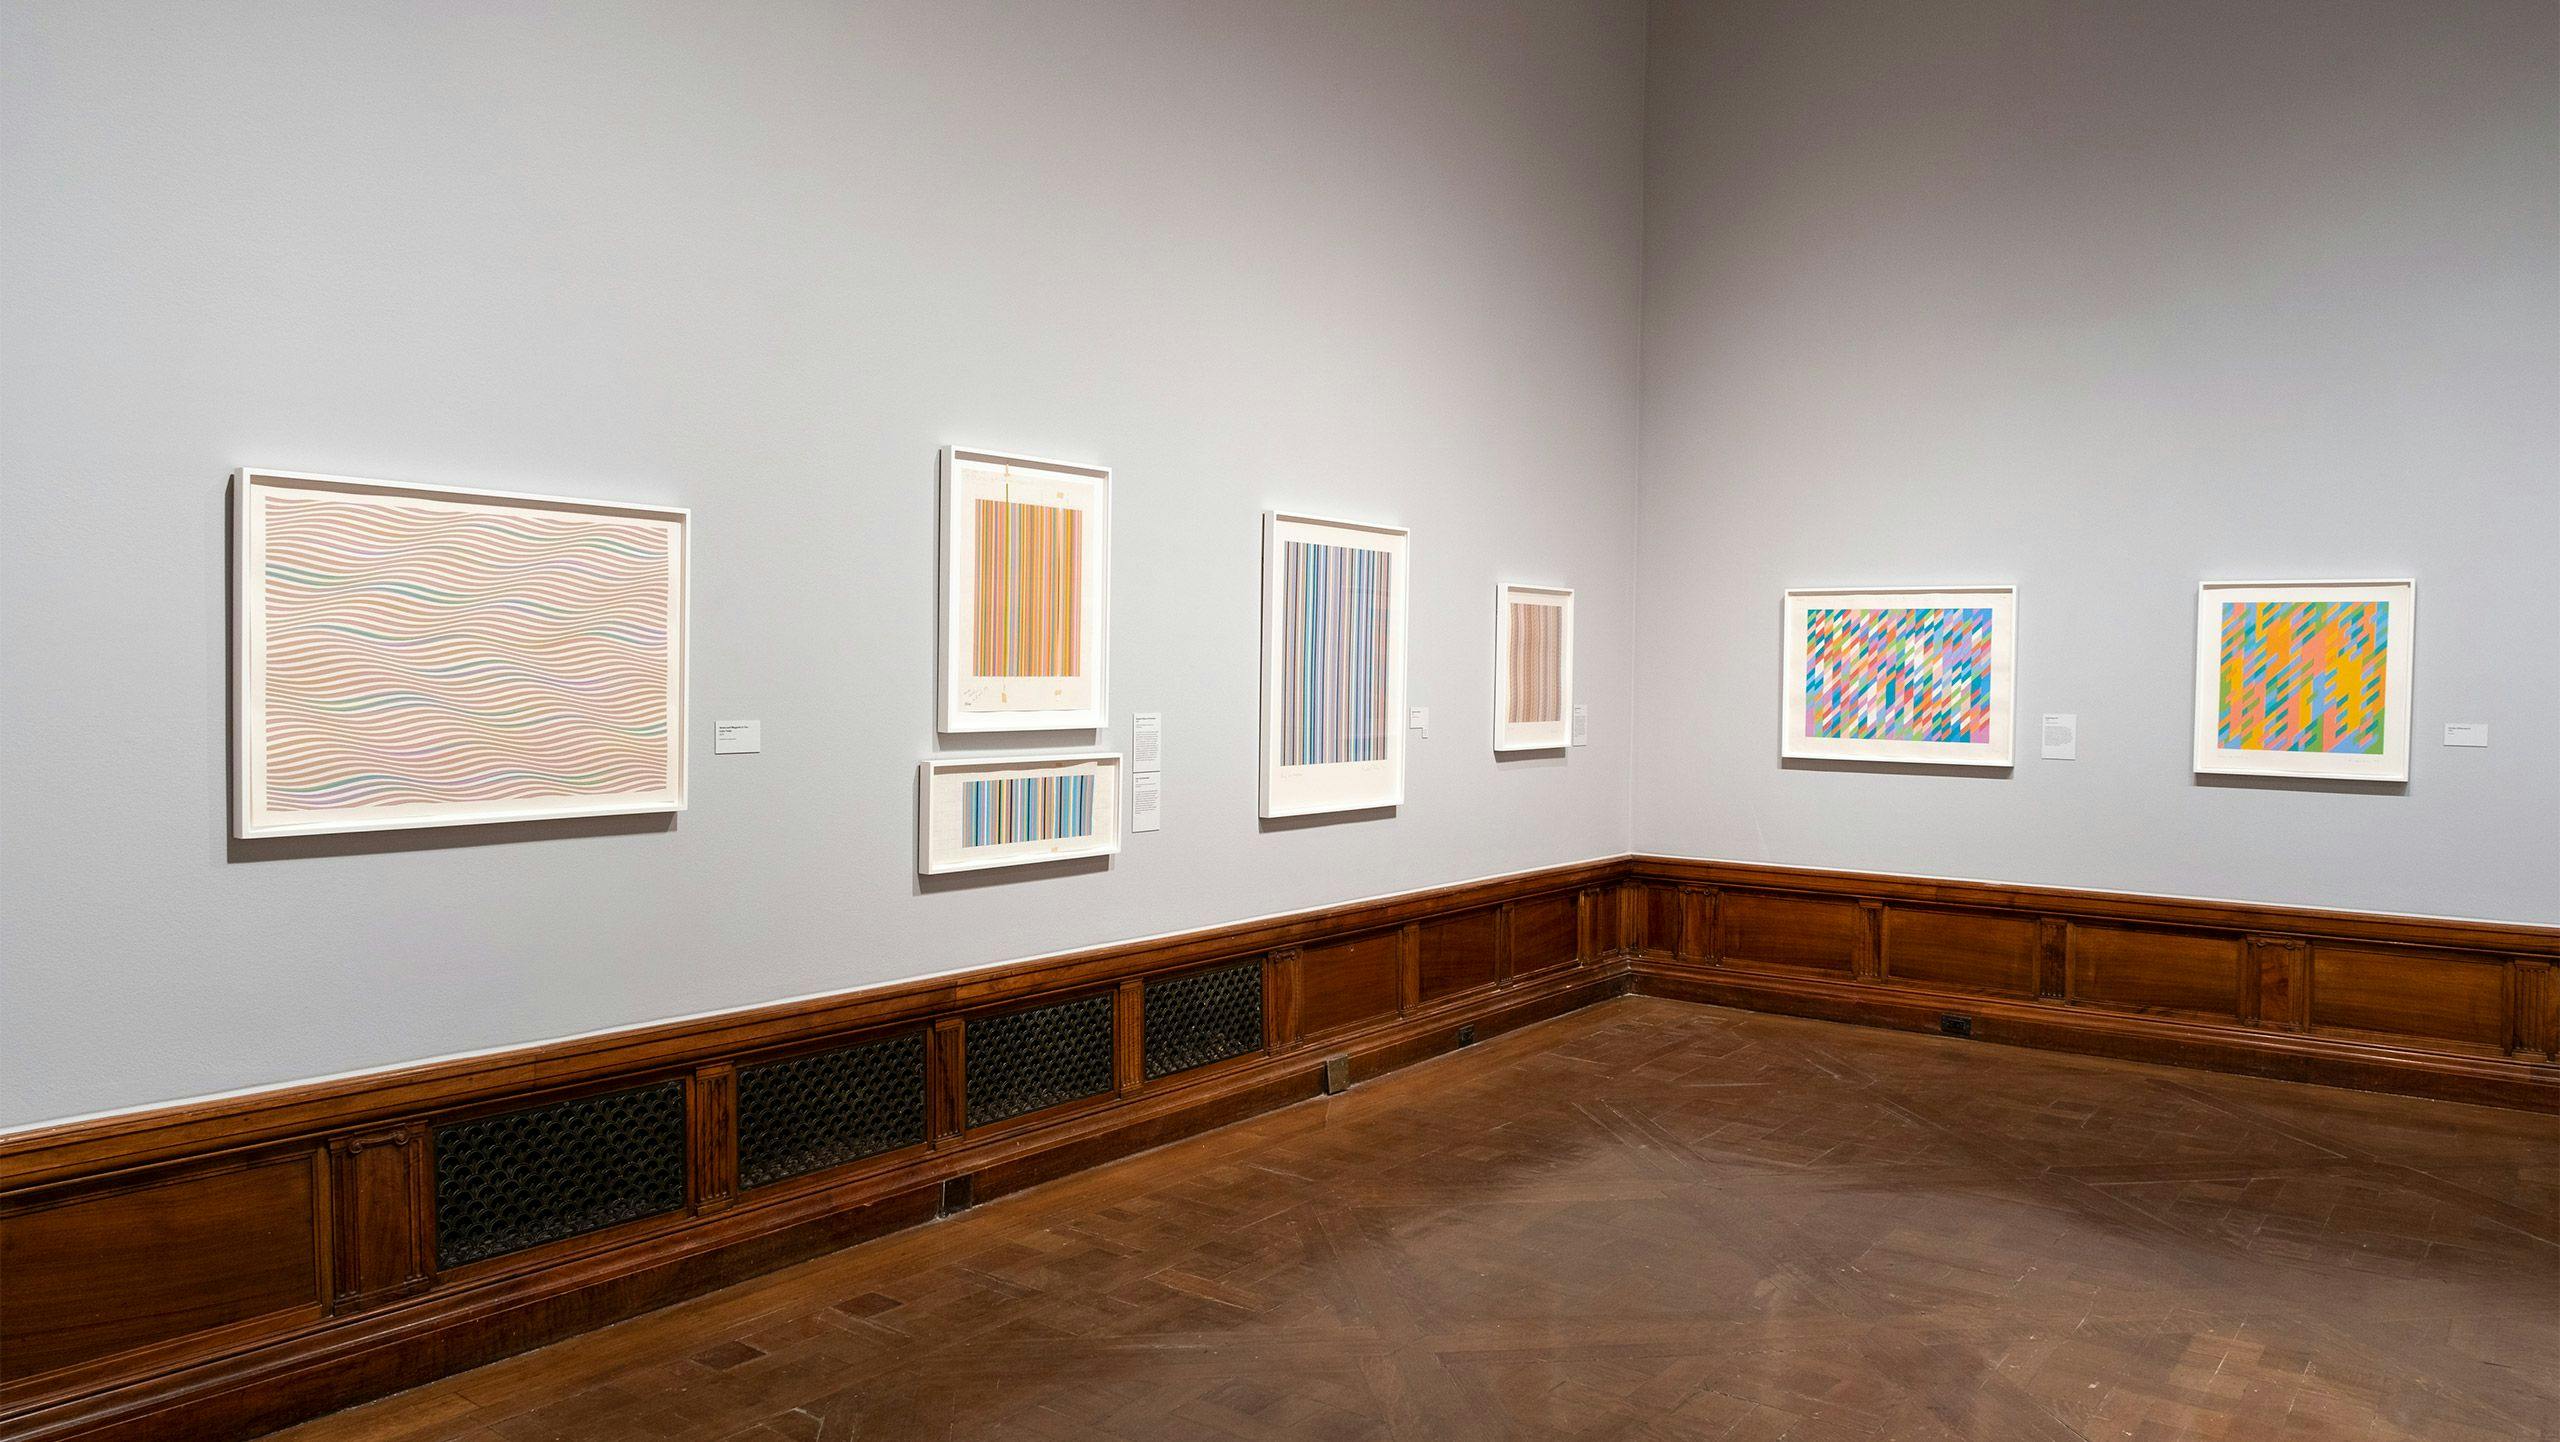 Installation view of the exhibition, Bridget Riley Drawings: From the Artist’s Studio, at the Morgan Library and Museum in New York, dated 2023.